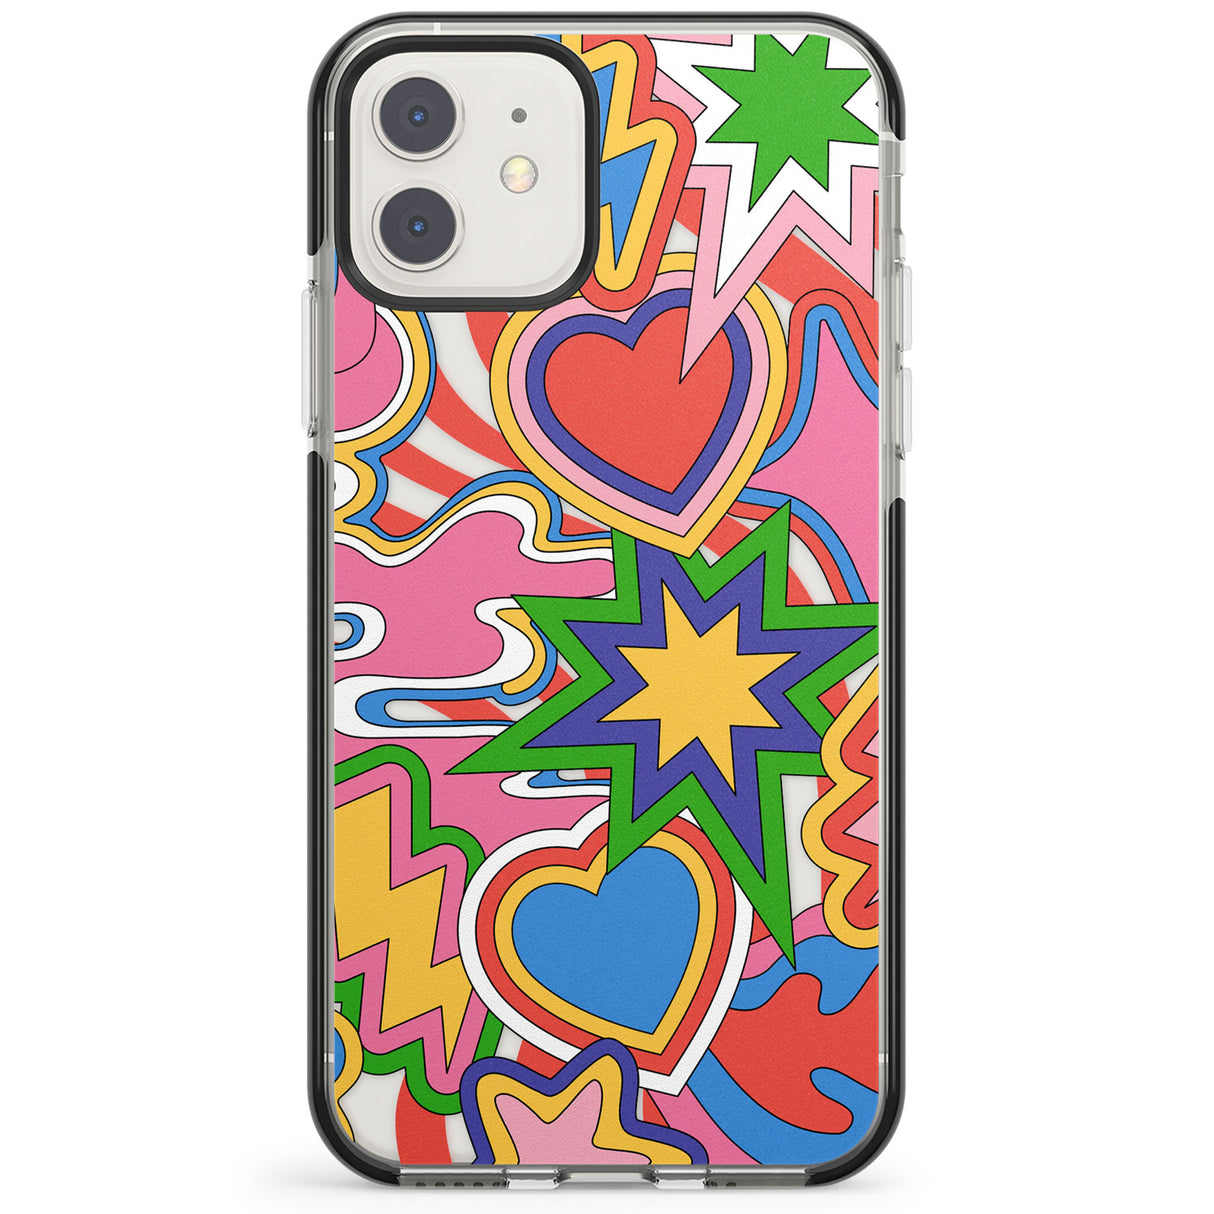 Psychedelic Pop Art Explosion Impact Phone Case for iPhone 11, iphone 12